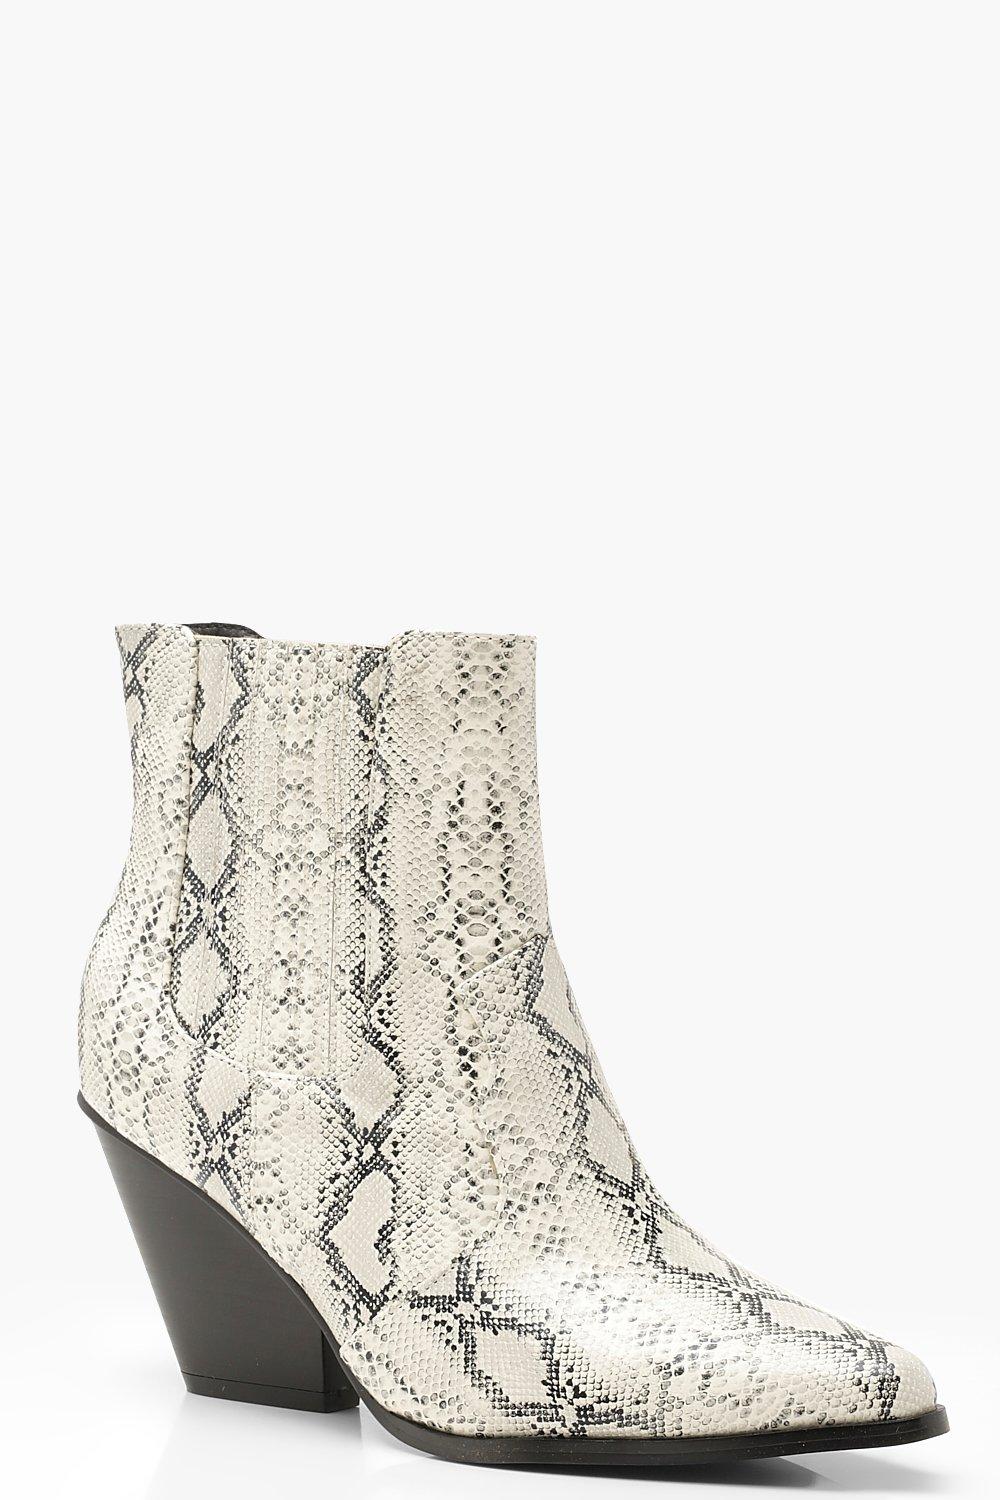 snake print ankle boots uk